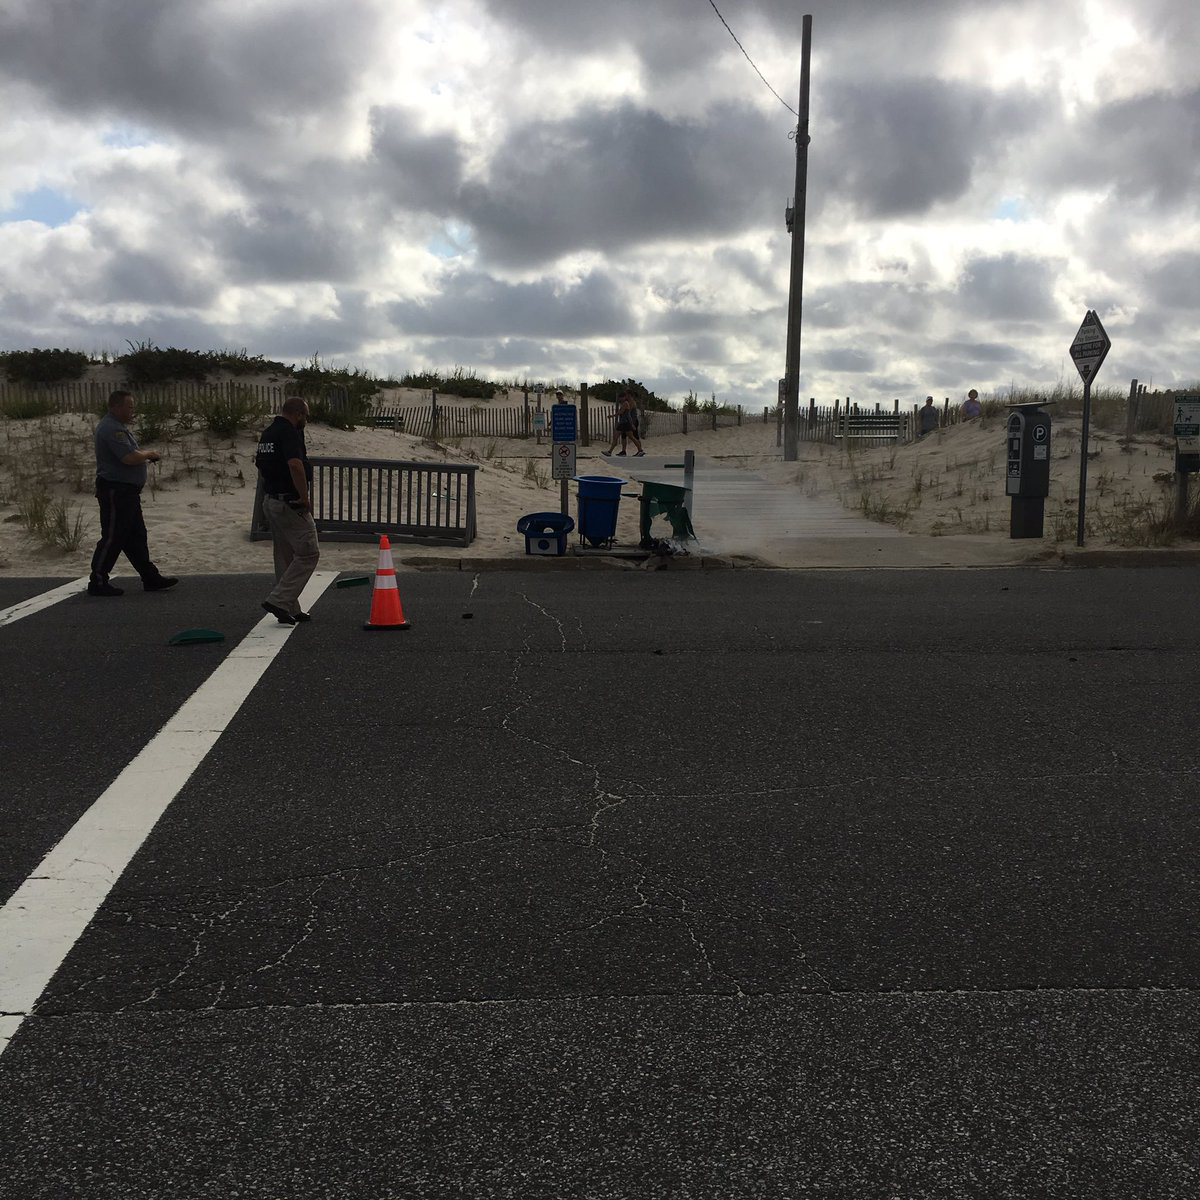 PHOTO: Kathy Madsen posted this photo to Twitter on Sept. 17, 2016 with the caption, "Seaside Park Police at the scene."